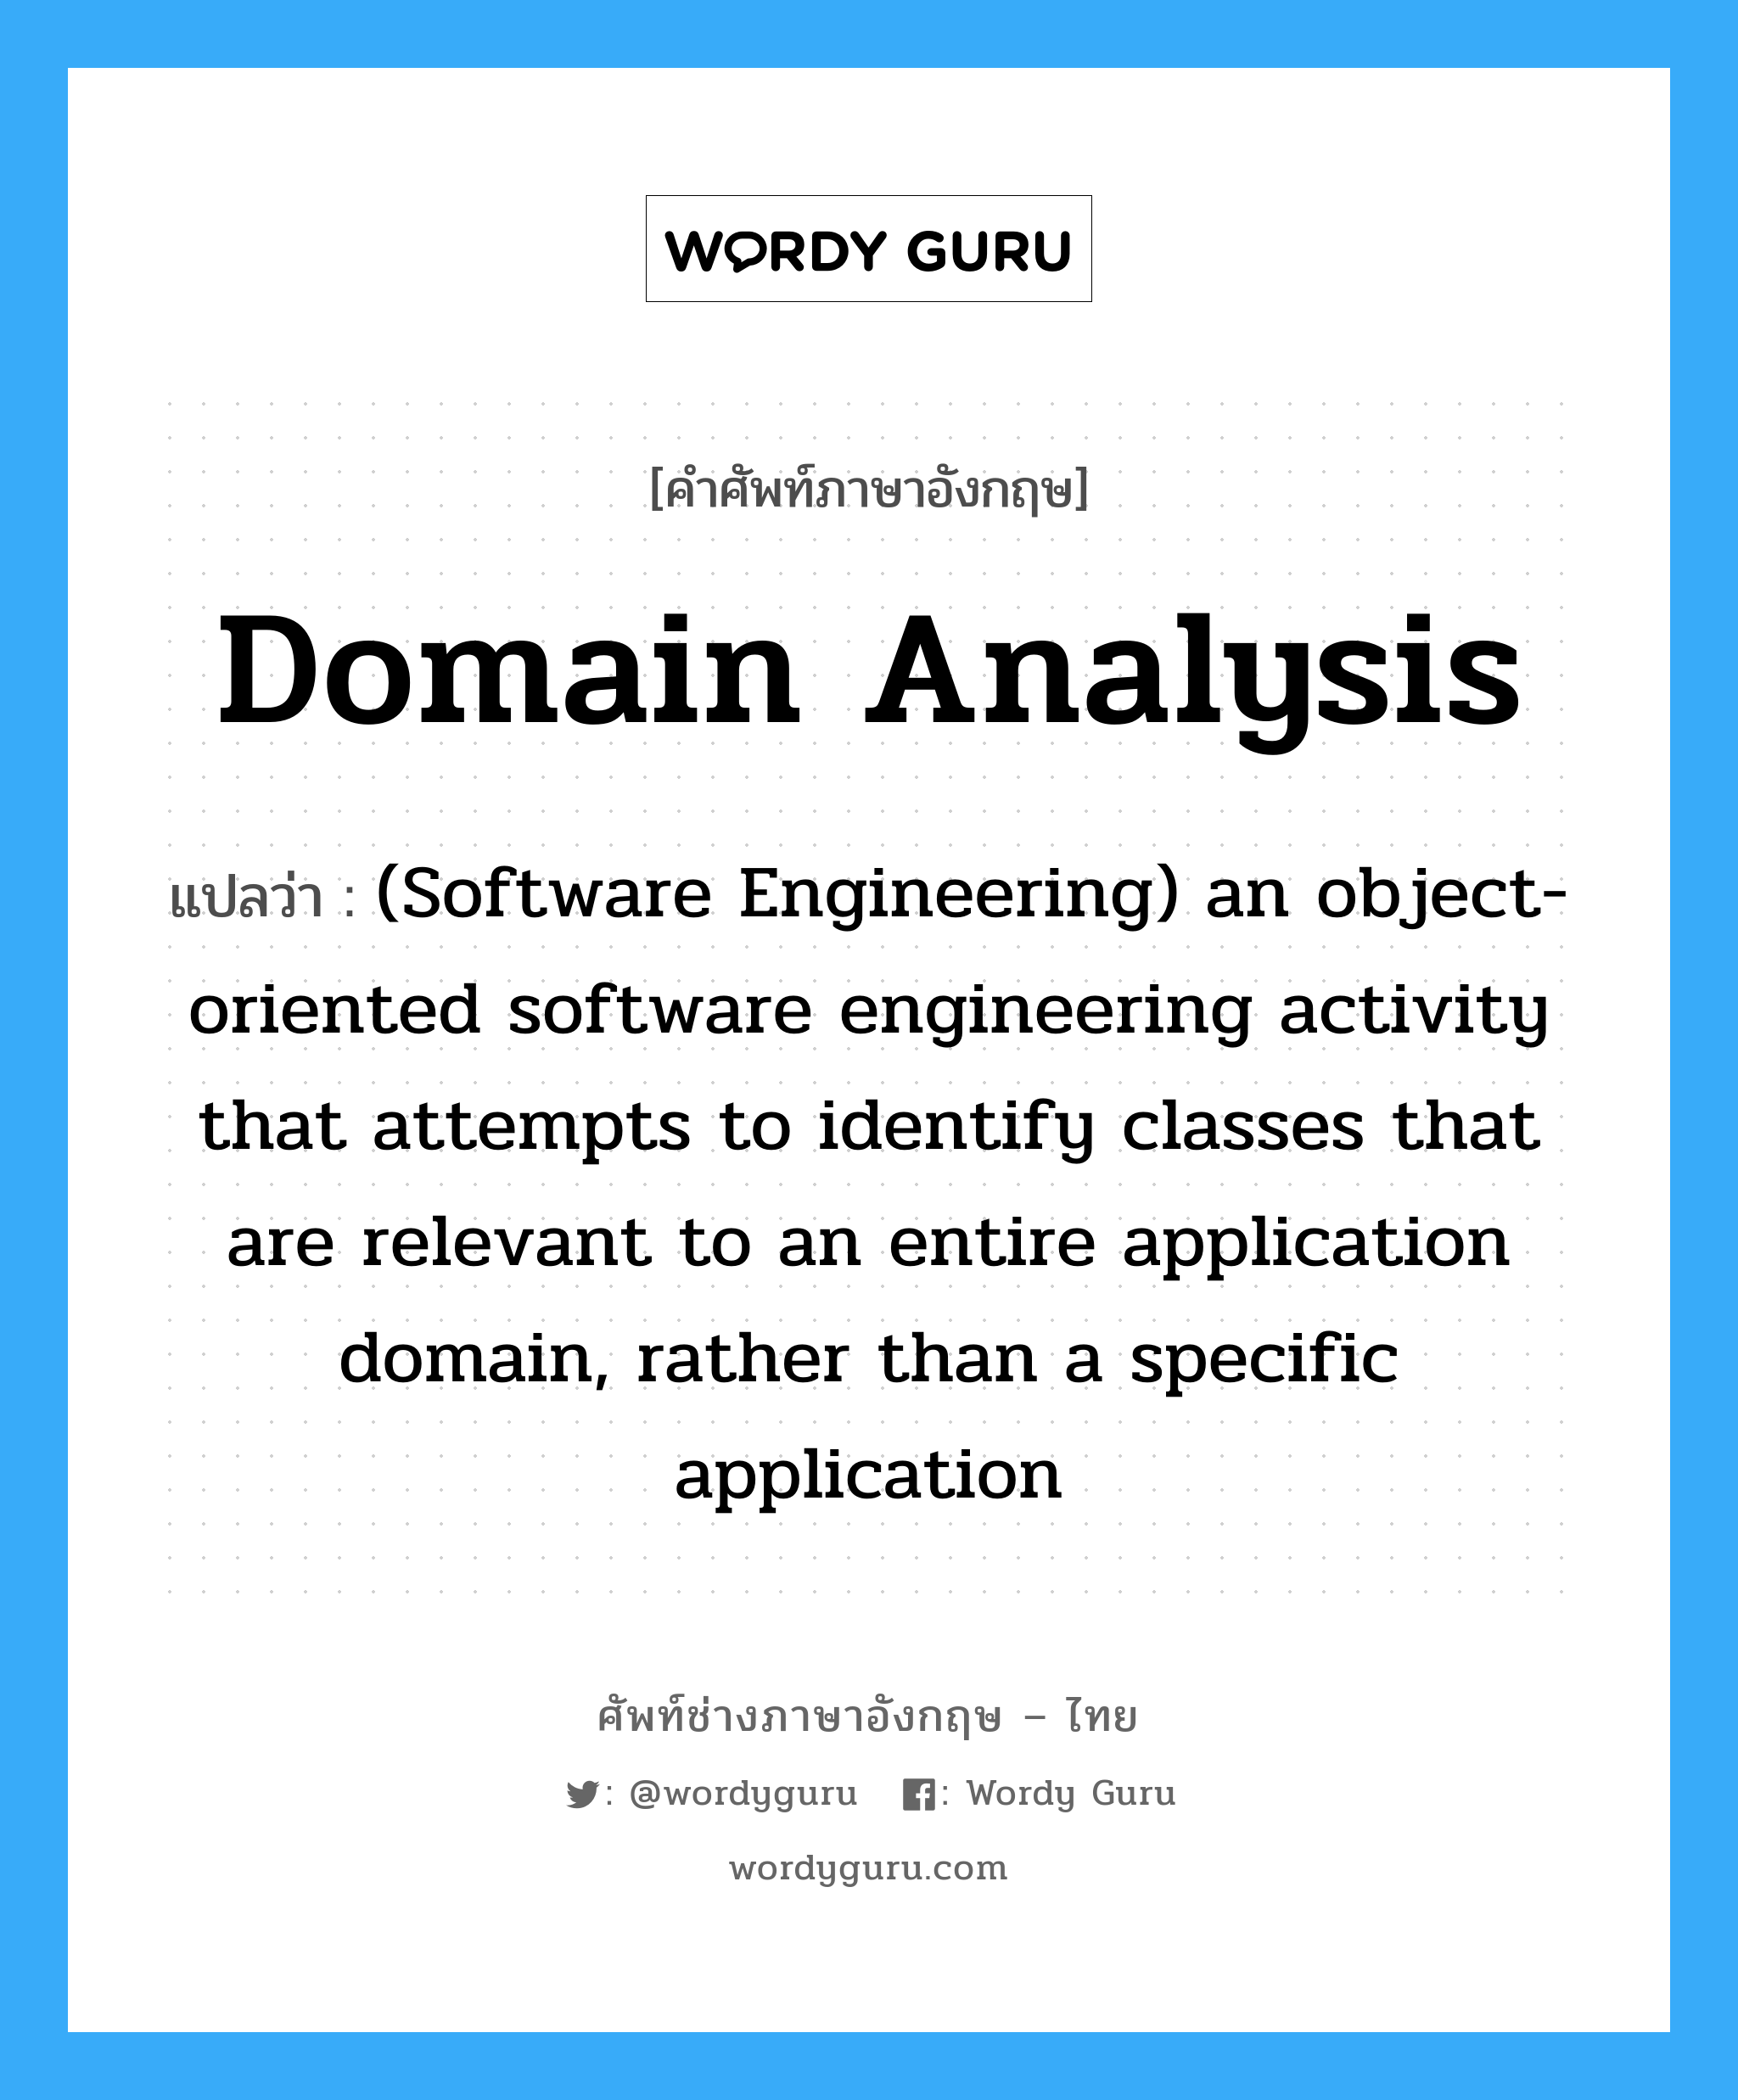 Domain analysis แปลว่า?, คำศัพท์ช่างภาษาอังกฤษ - ไทย Domain analysis คำศัพท์ภาษาอังกฤษ Domain analysis แปลว่า (Software Engineering) an object-oriented software engineering activity that attempts to identify classes that are relevant to an entire application domain, rather than a specific application